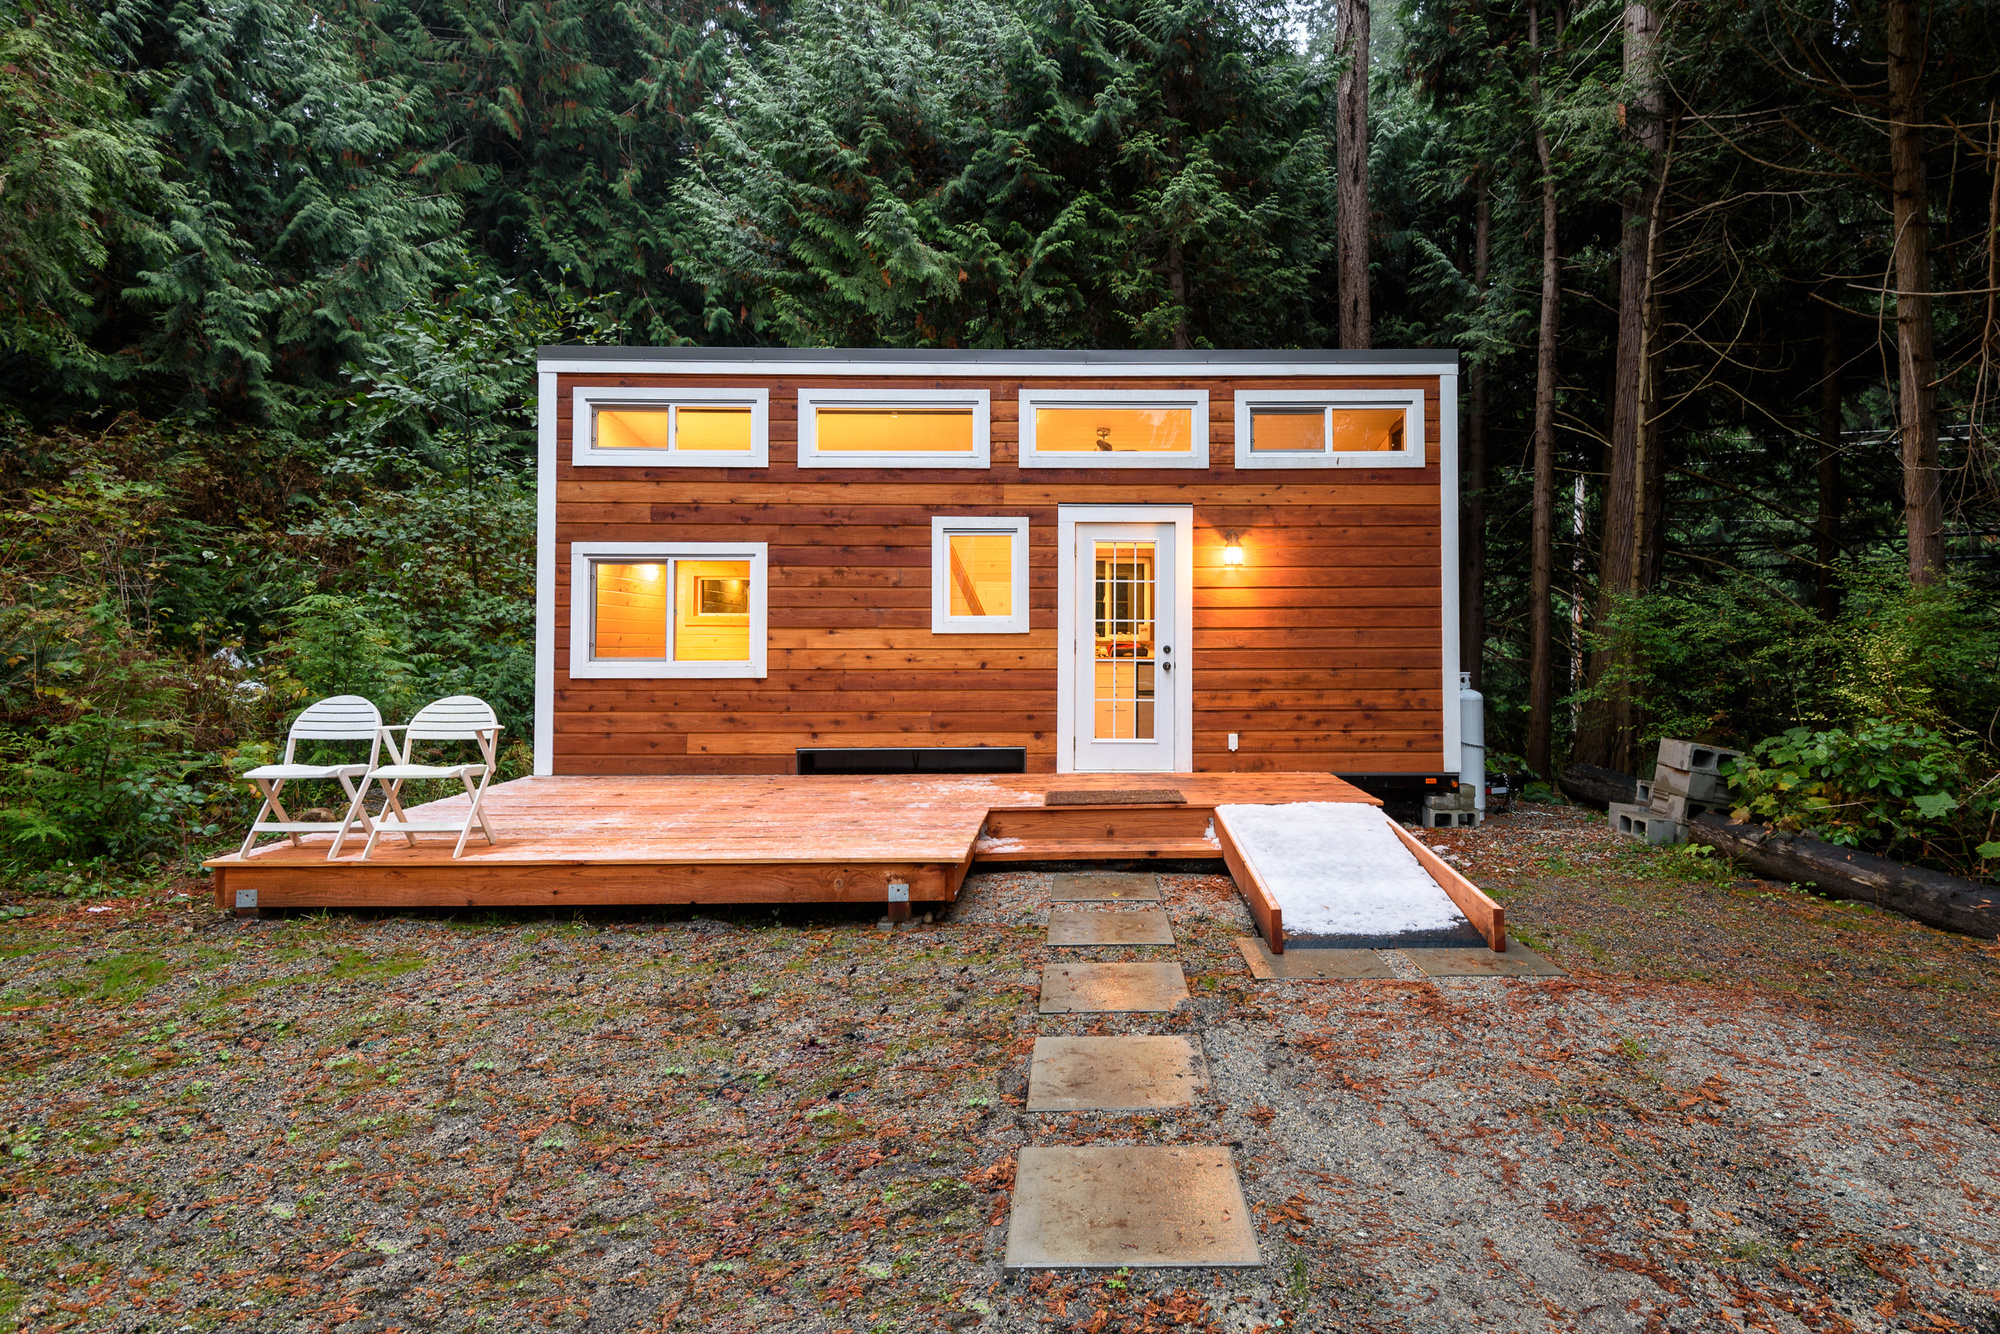 How To Buy A Tiny House Online